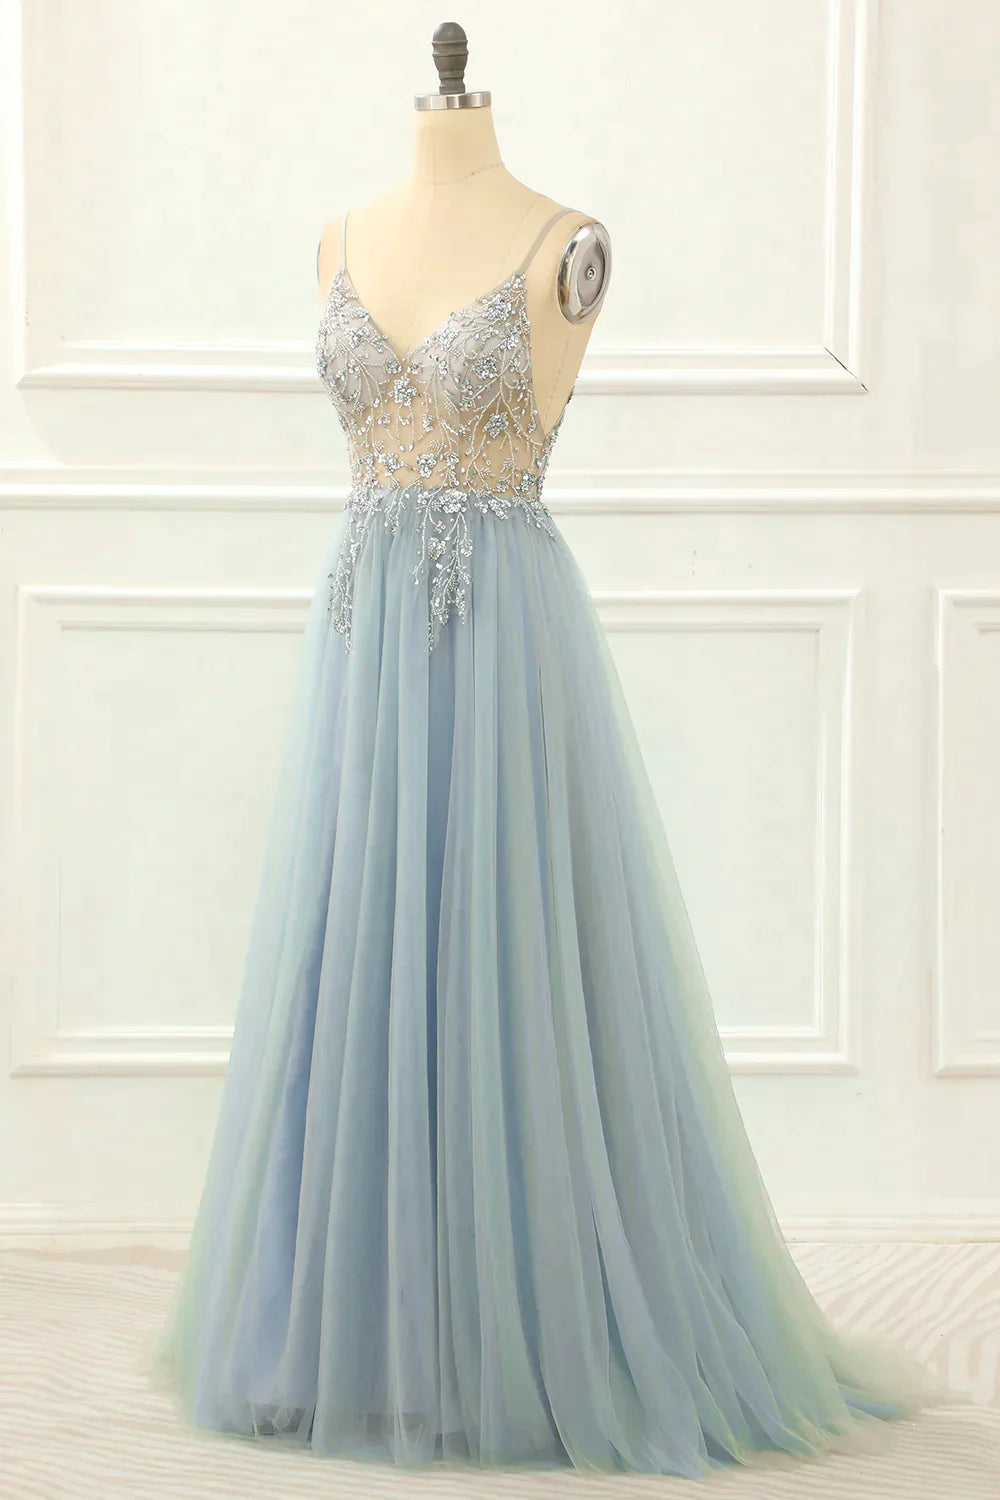 Gorgeous Tulle A-line Spaghetti Straps Long Prom Dress with Beading